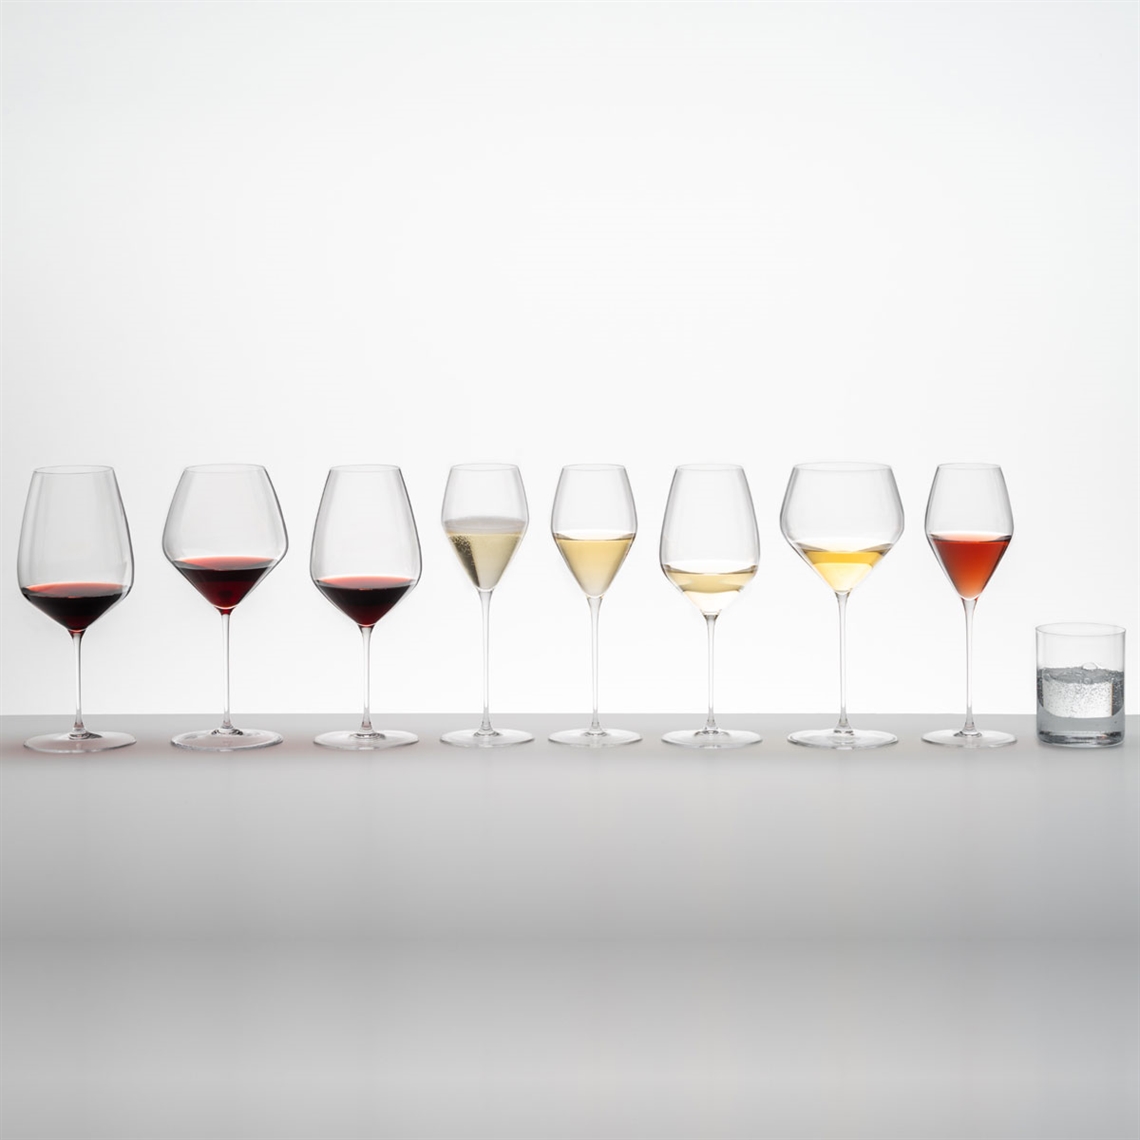 View our collection of Riedel Veloce Riedel Superleggero